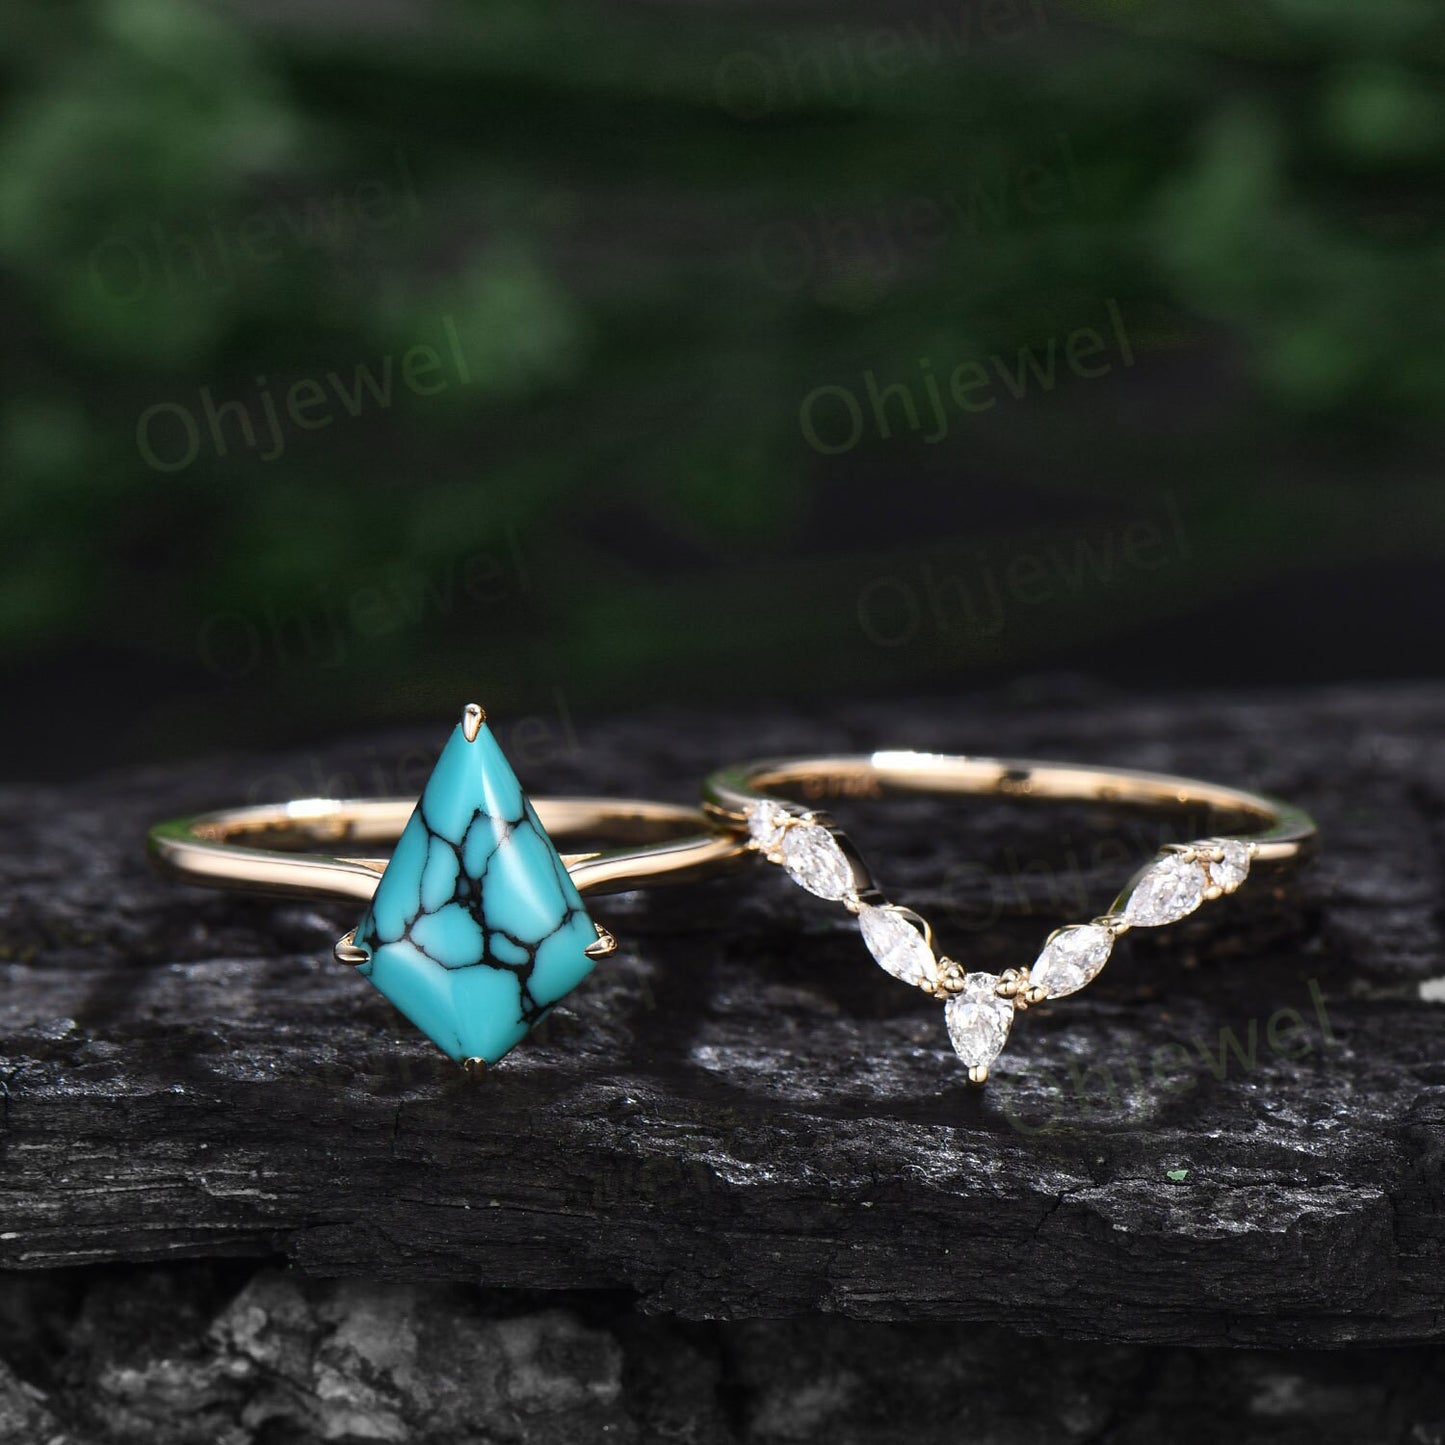 Kite natural Turquoise ring gold vintage unique engagement ring set Solitaire bridal wedding ring set women marquise moissanite ring gift